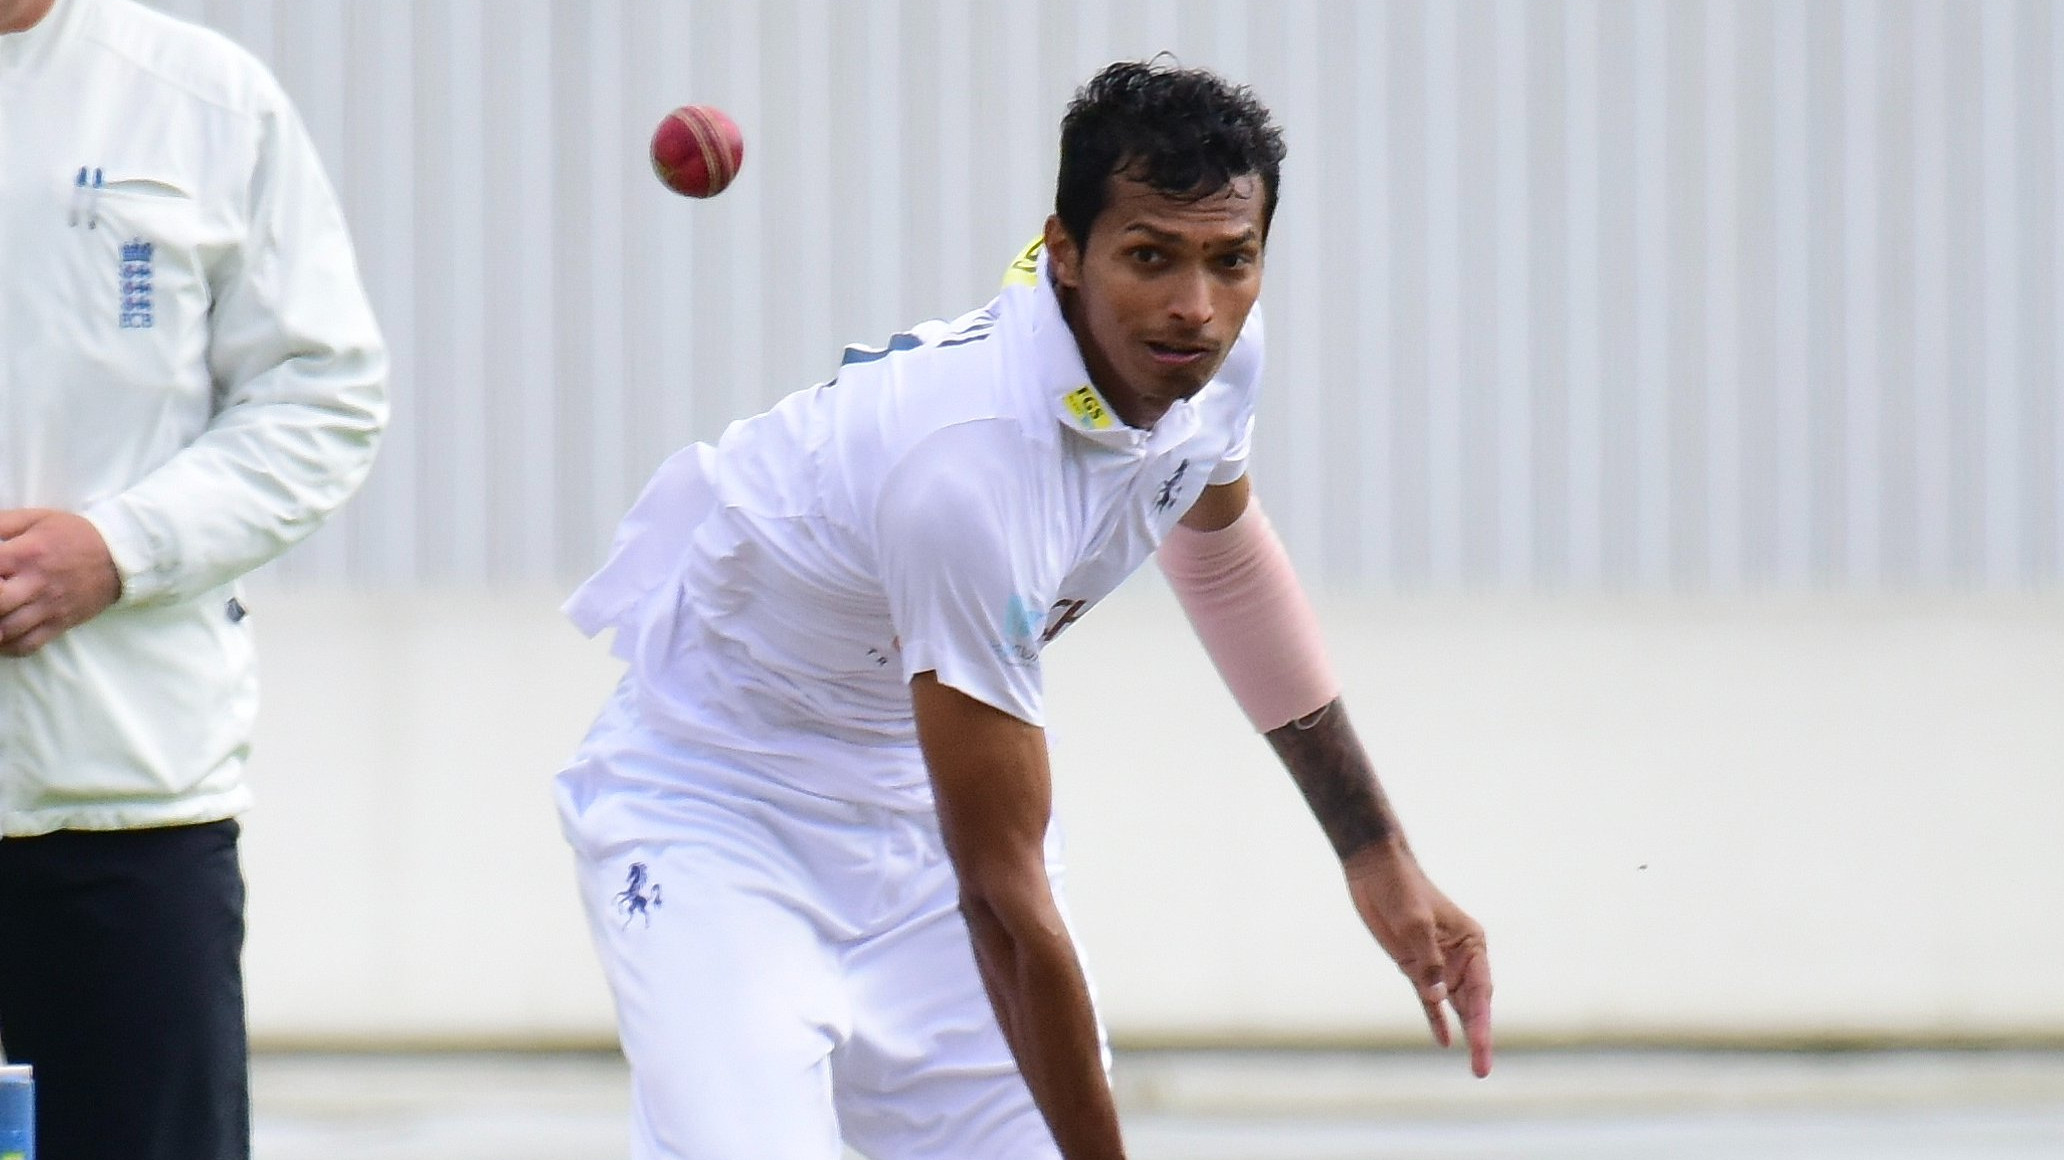 Navdeep Saini shines for Kent in County Championship, takes three wickets against Lancashire